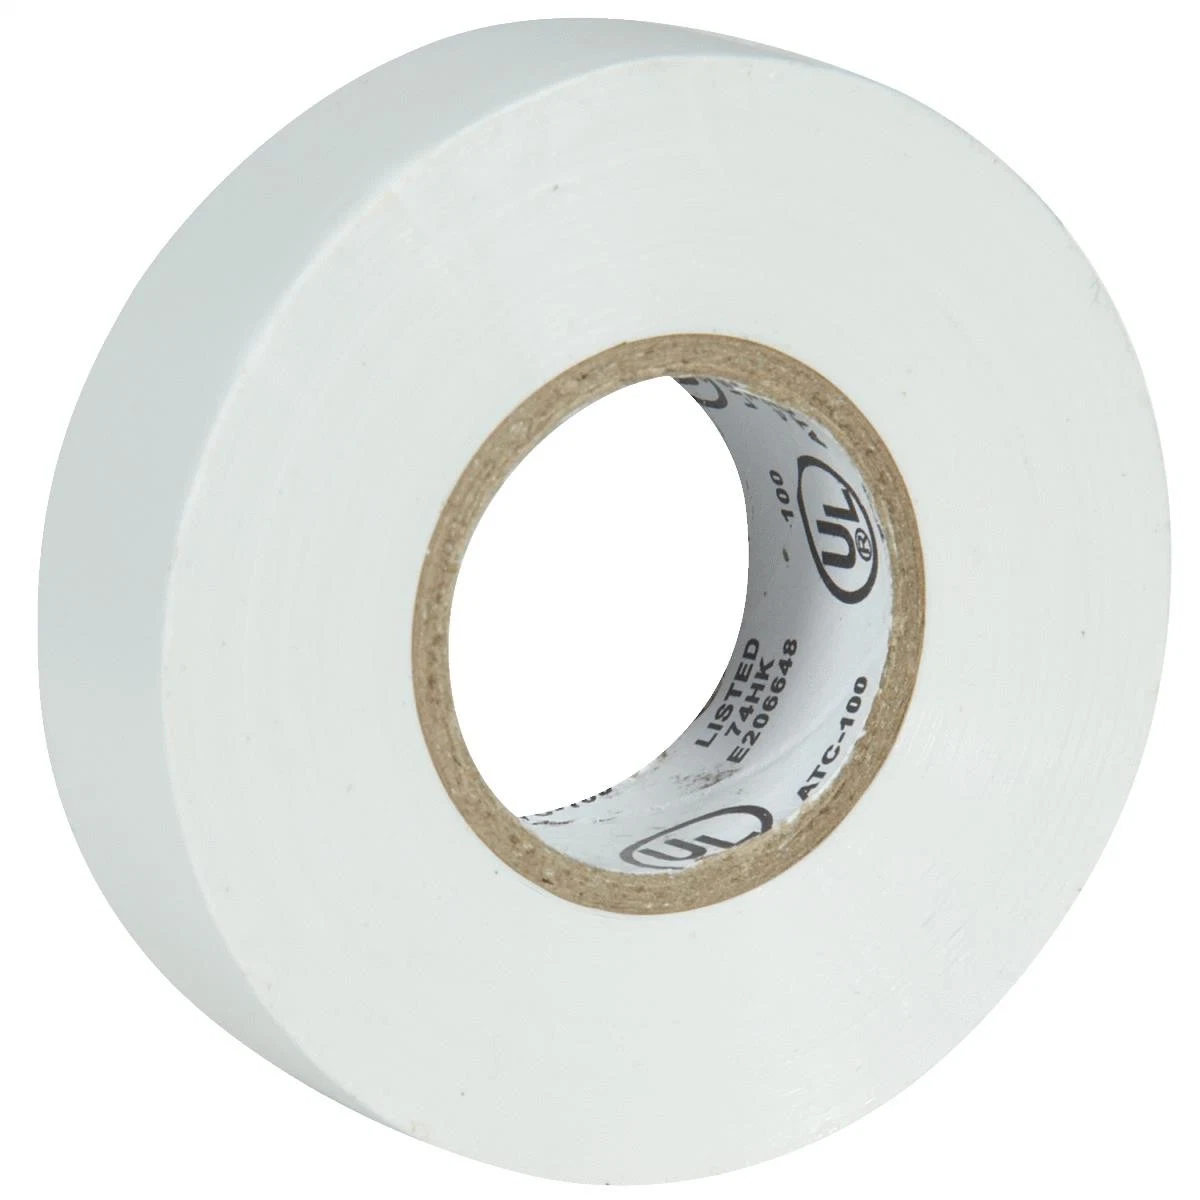 Waterproof Made in Taiwan RoHS Self-Adhesive Soft PVC Insulated Achem Wonder Vinyl Electrical Insulation Tape